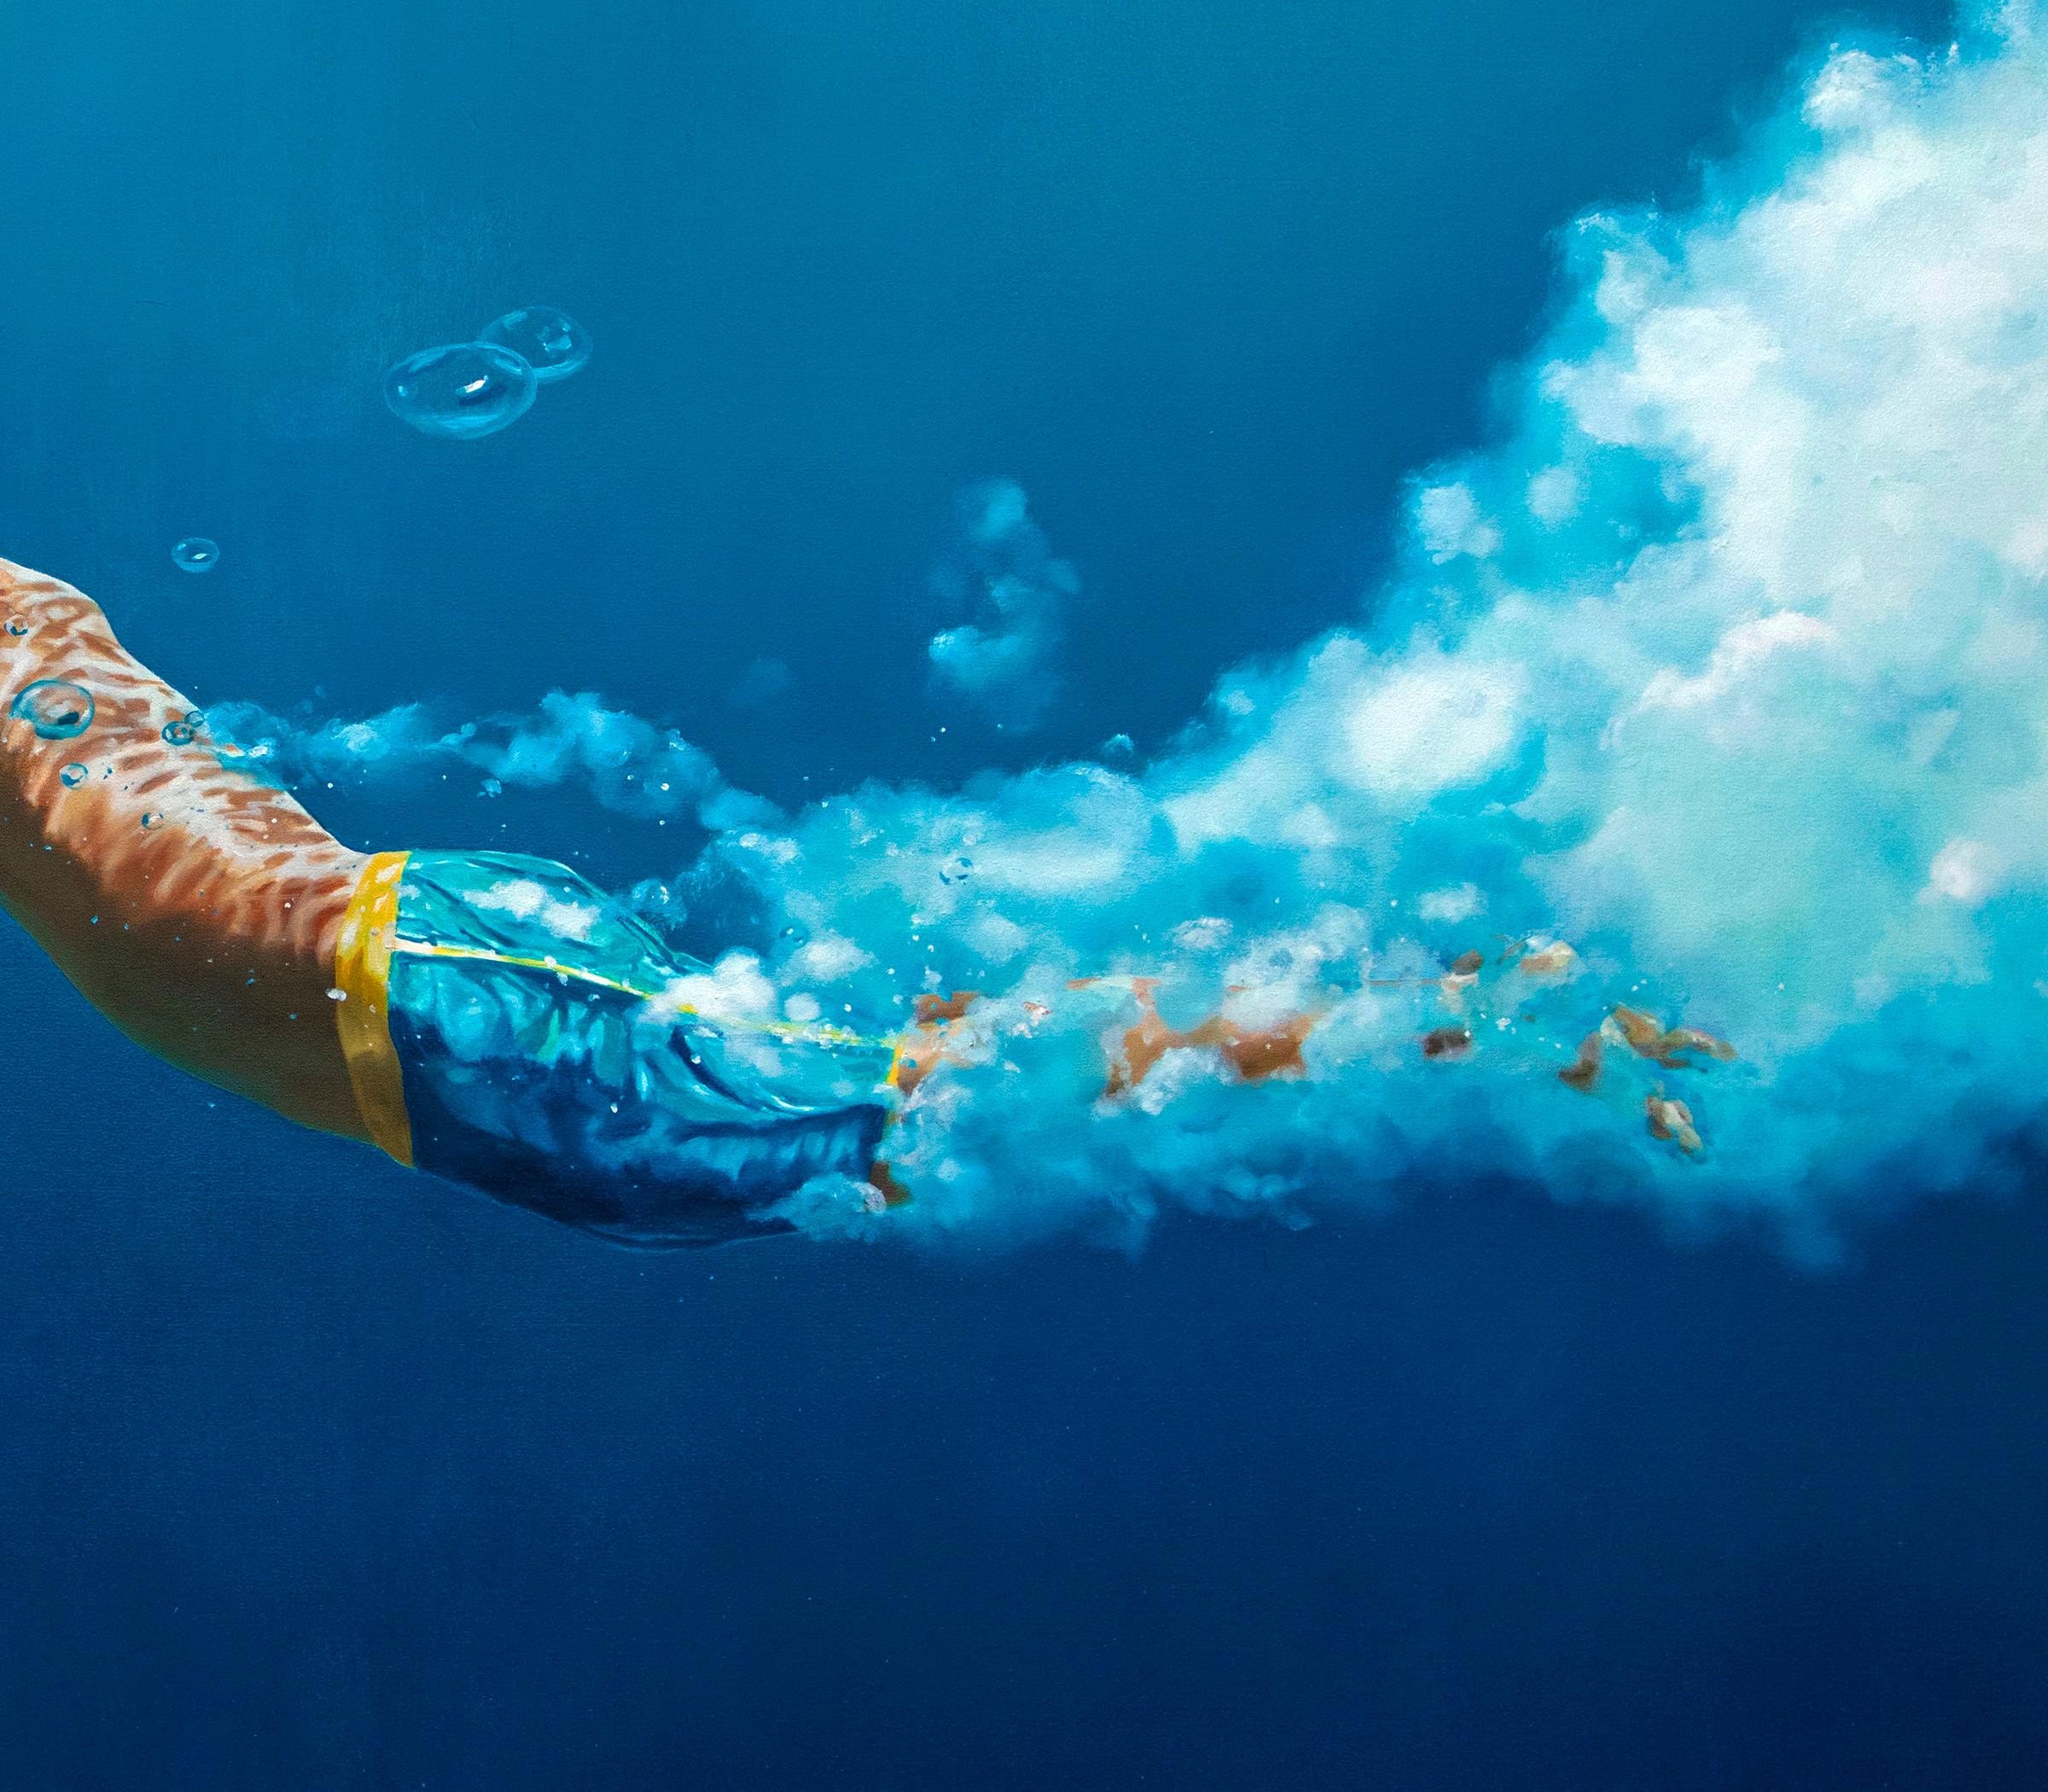 painting bubbles underwater